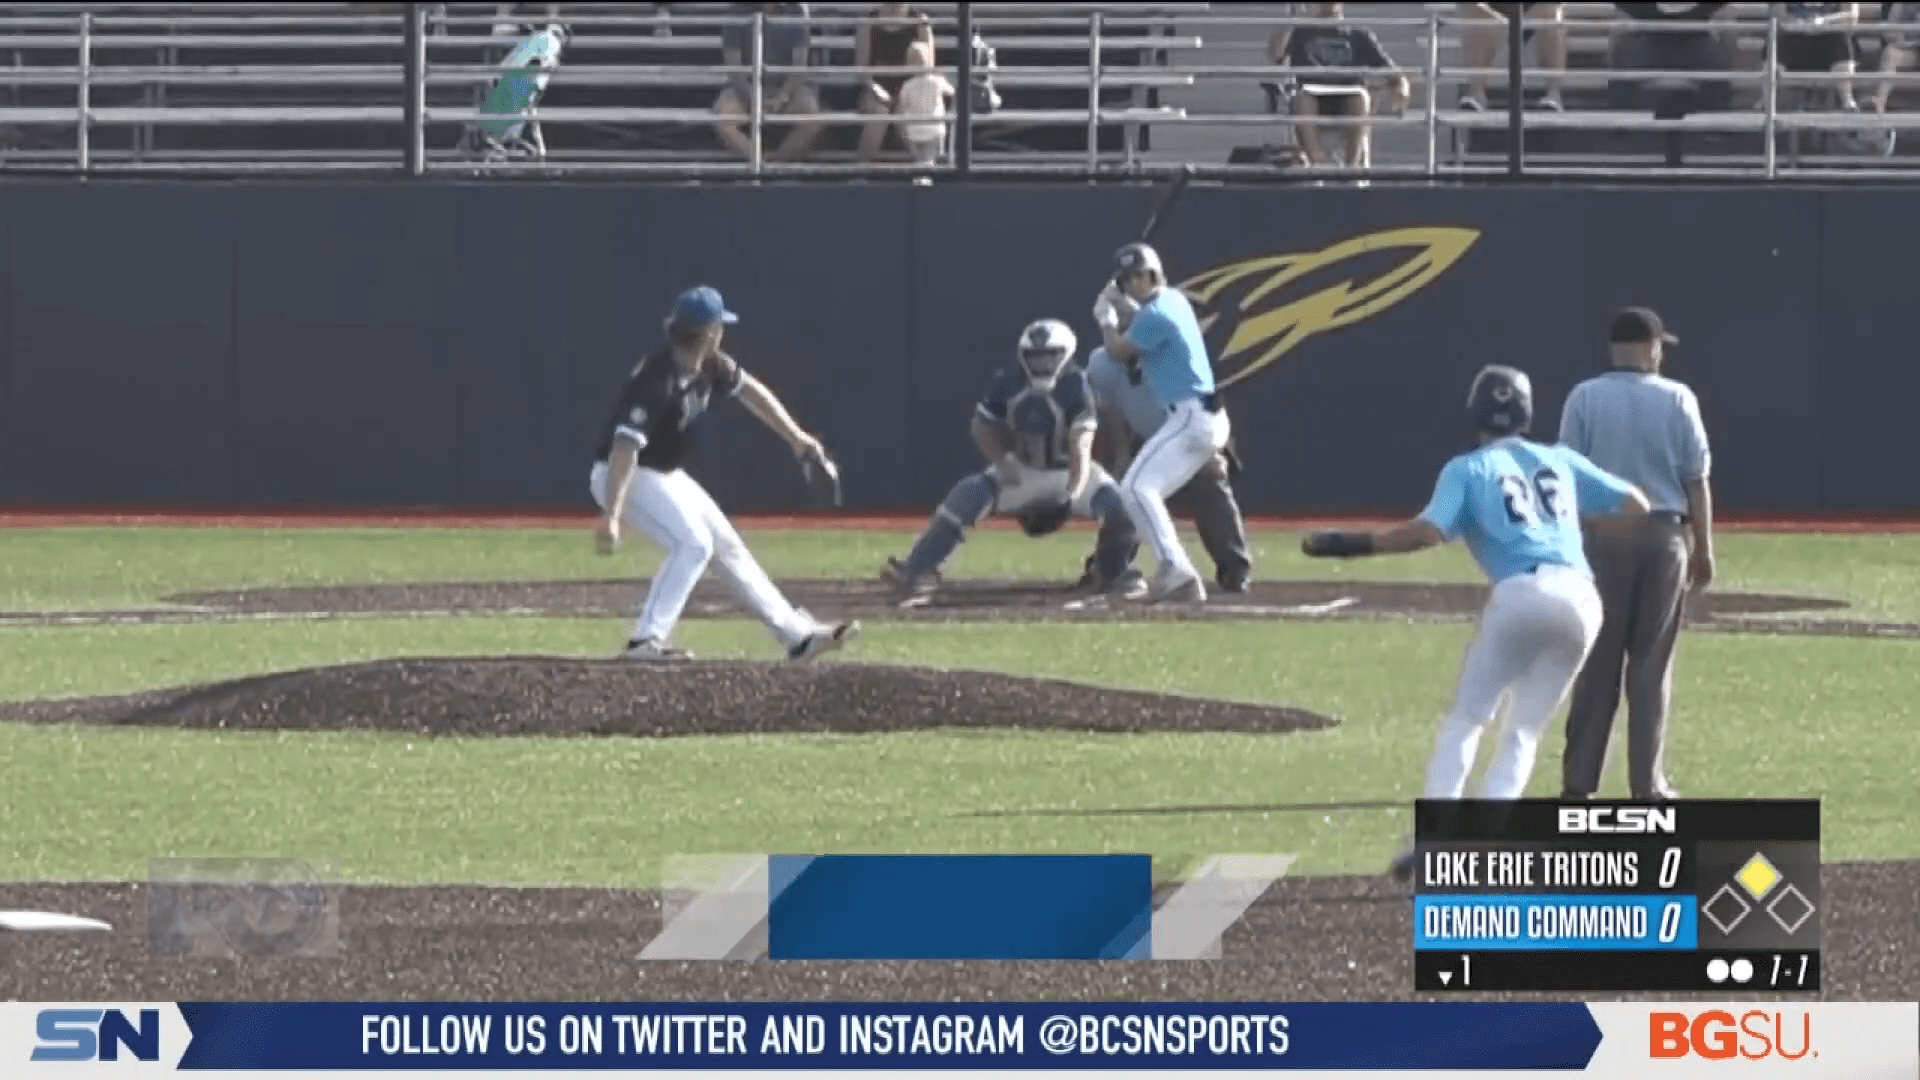 Demand Command Triumphs Over Tritons in PBR Battle of the Crossroads BCSN